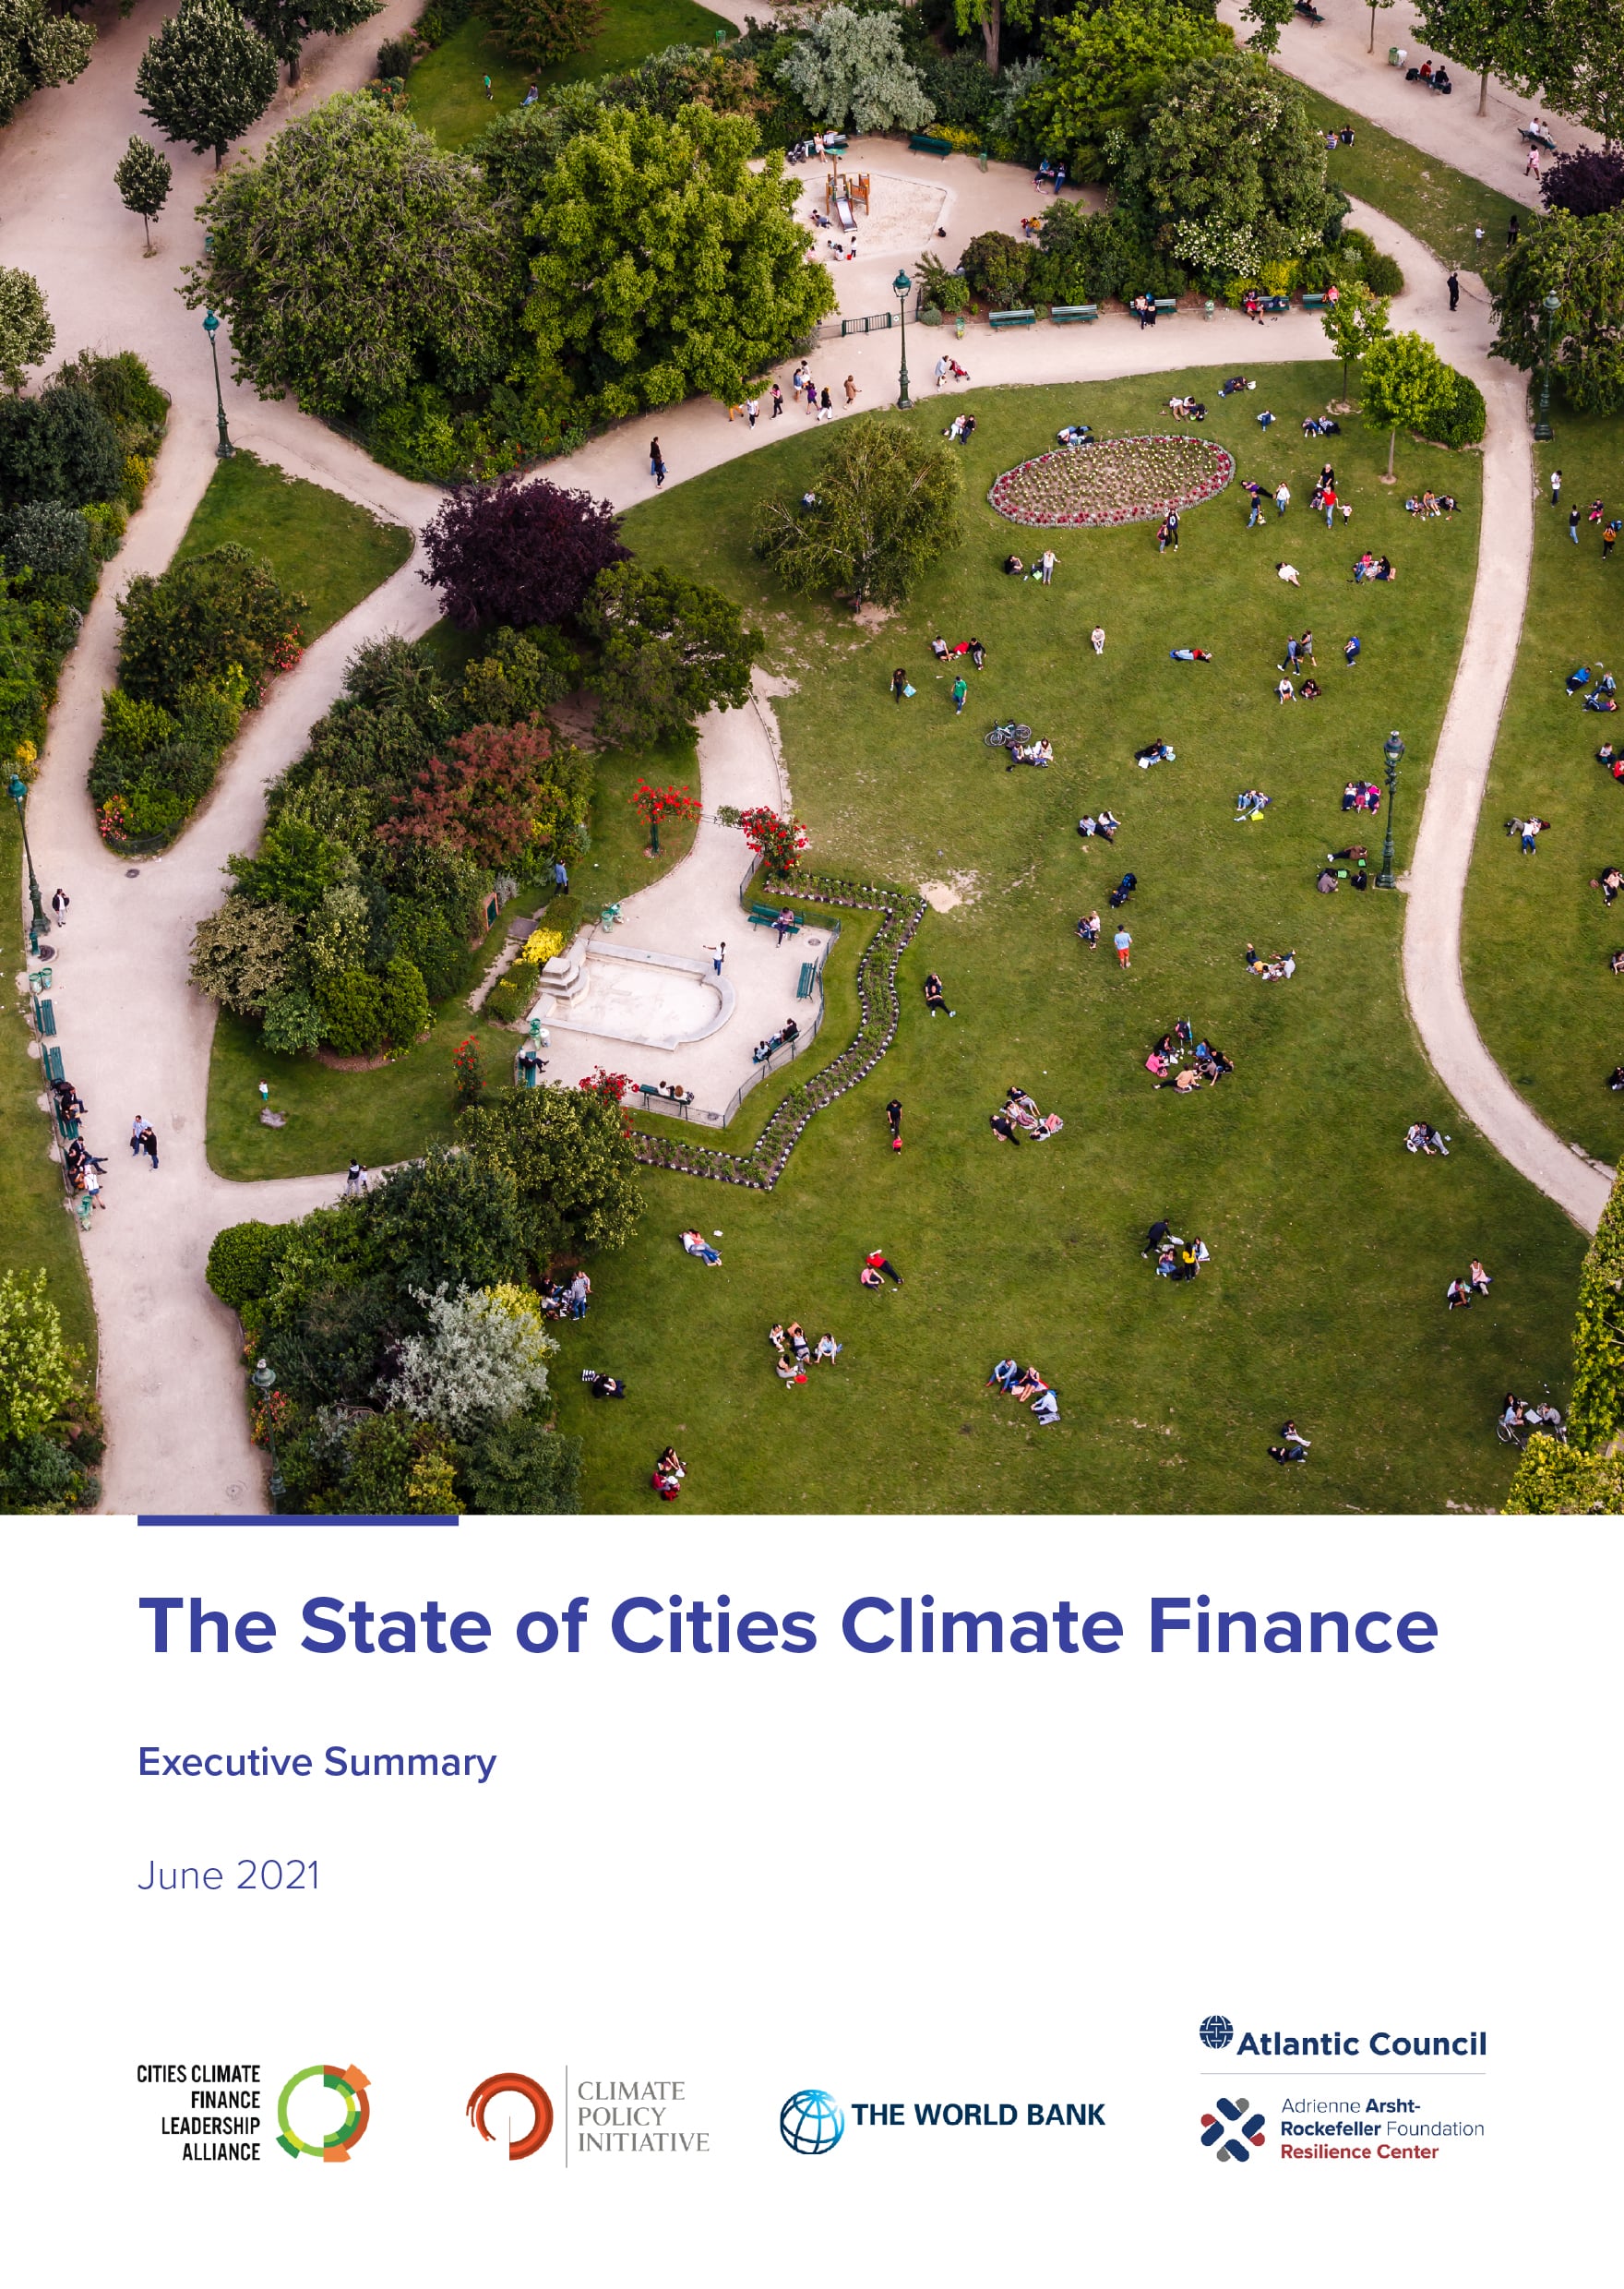 The 2021 State of Cities Climate Finance Report